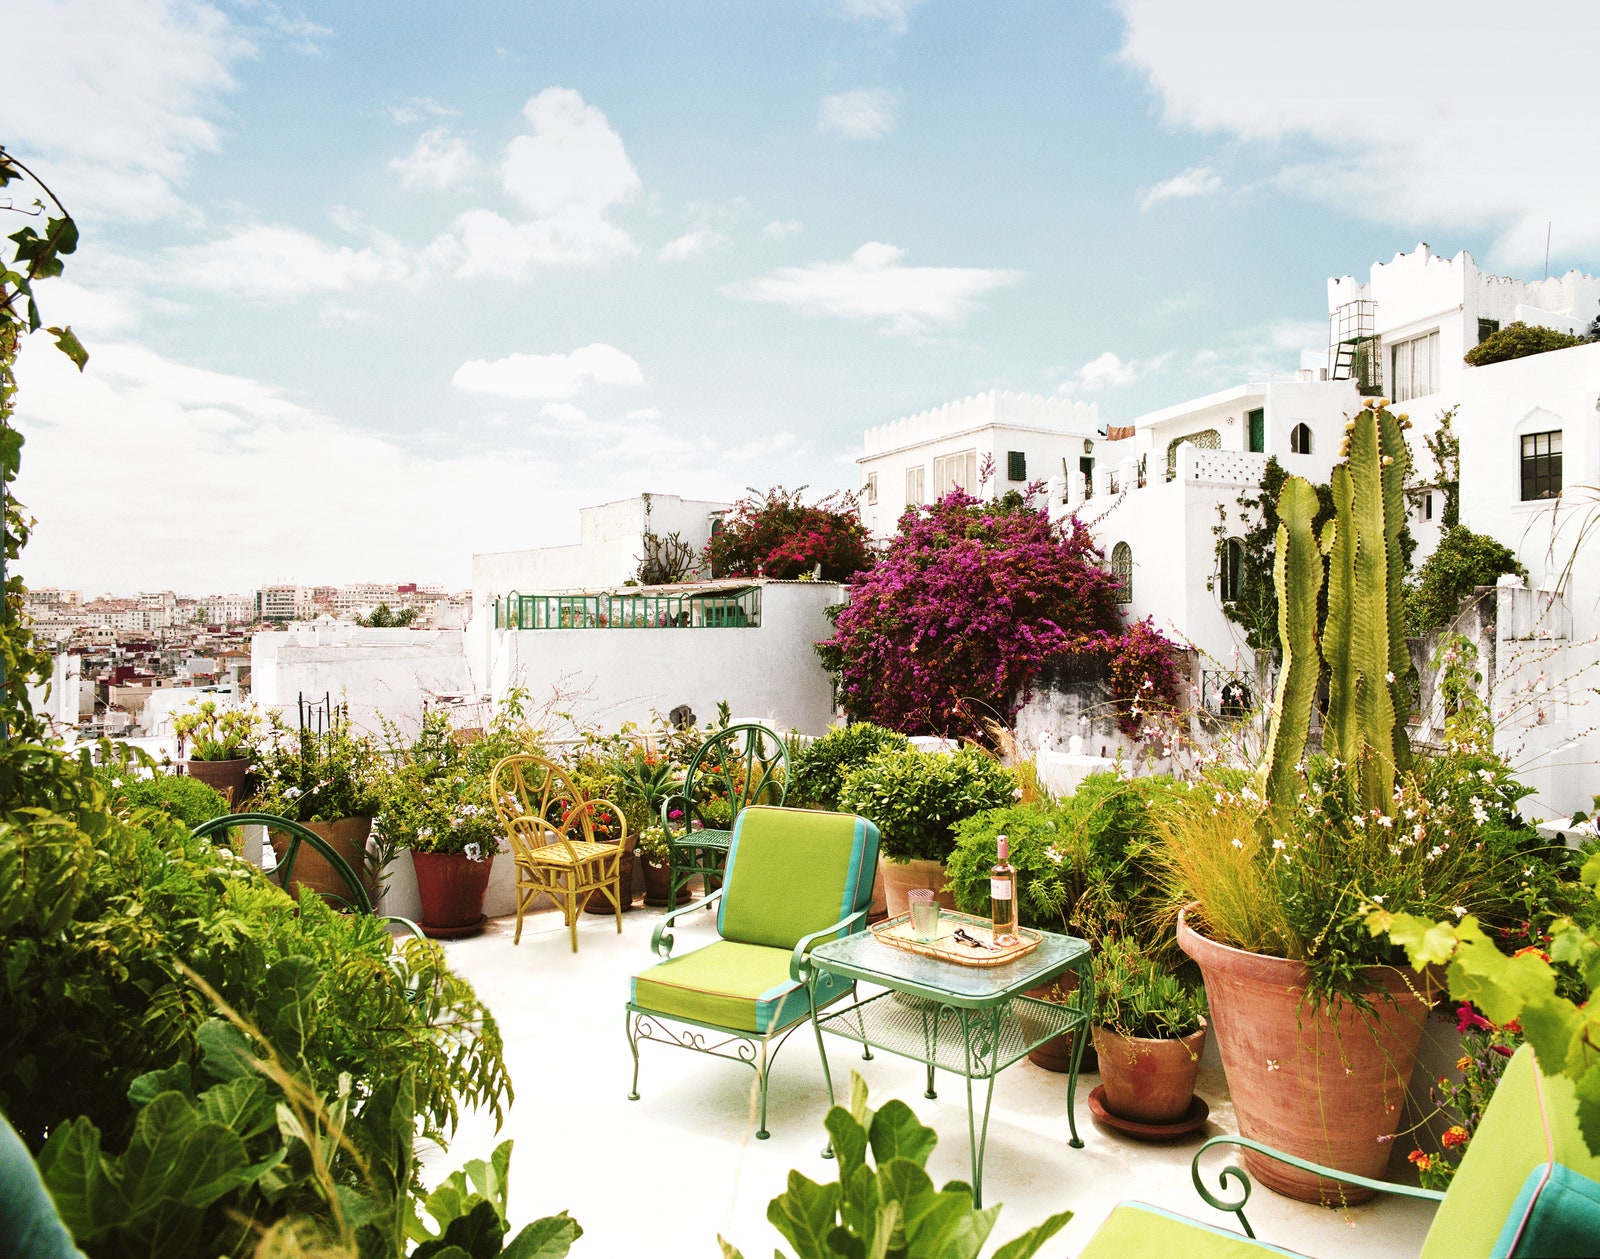 At Home With: Designers Frank de Biasi and Gene Meyer, Tangier